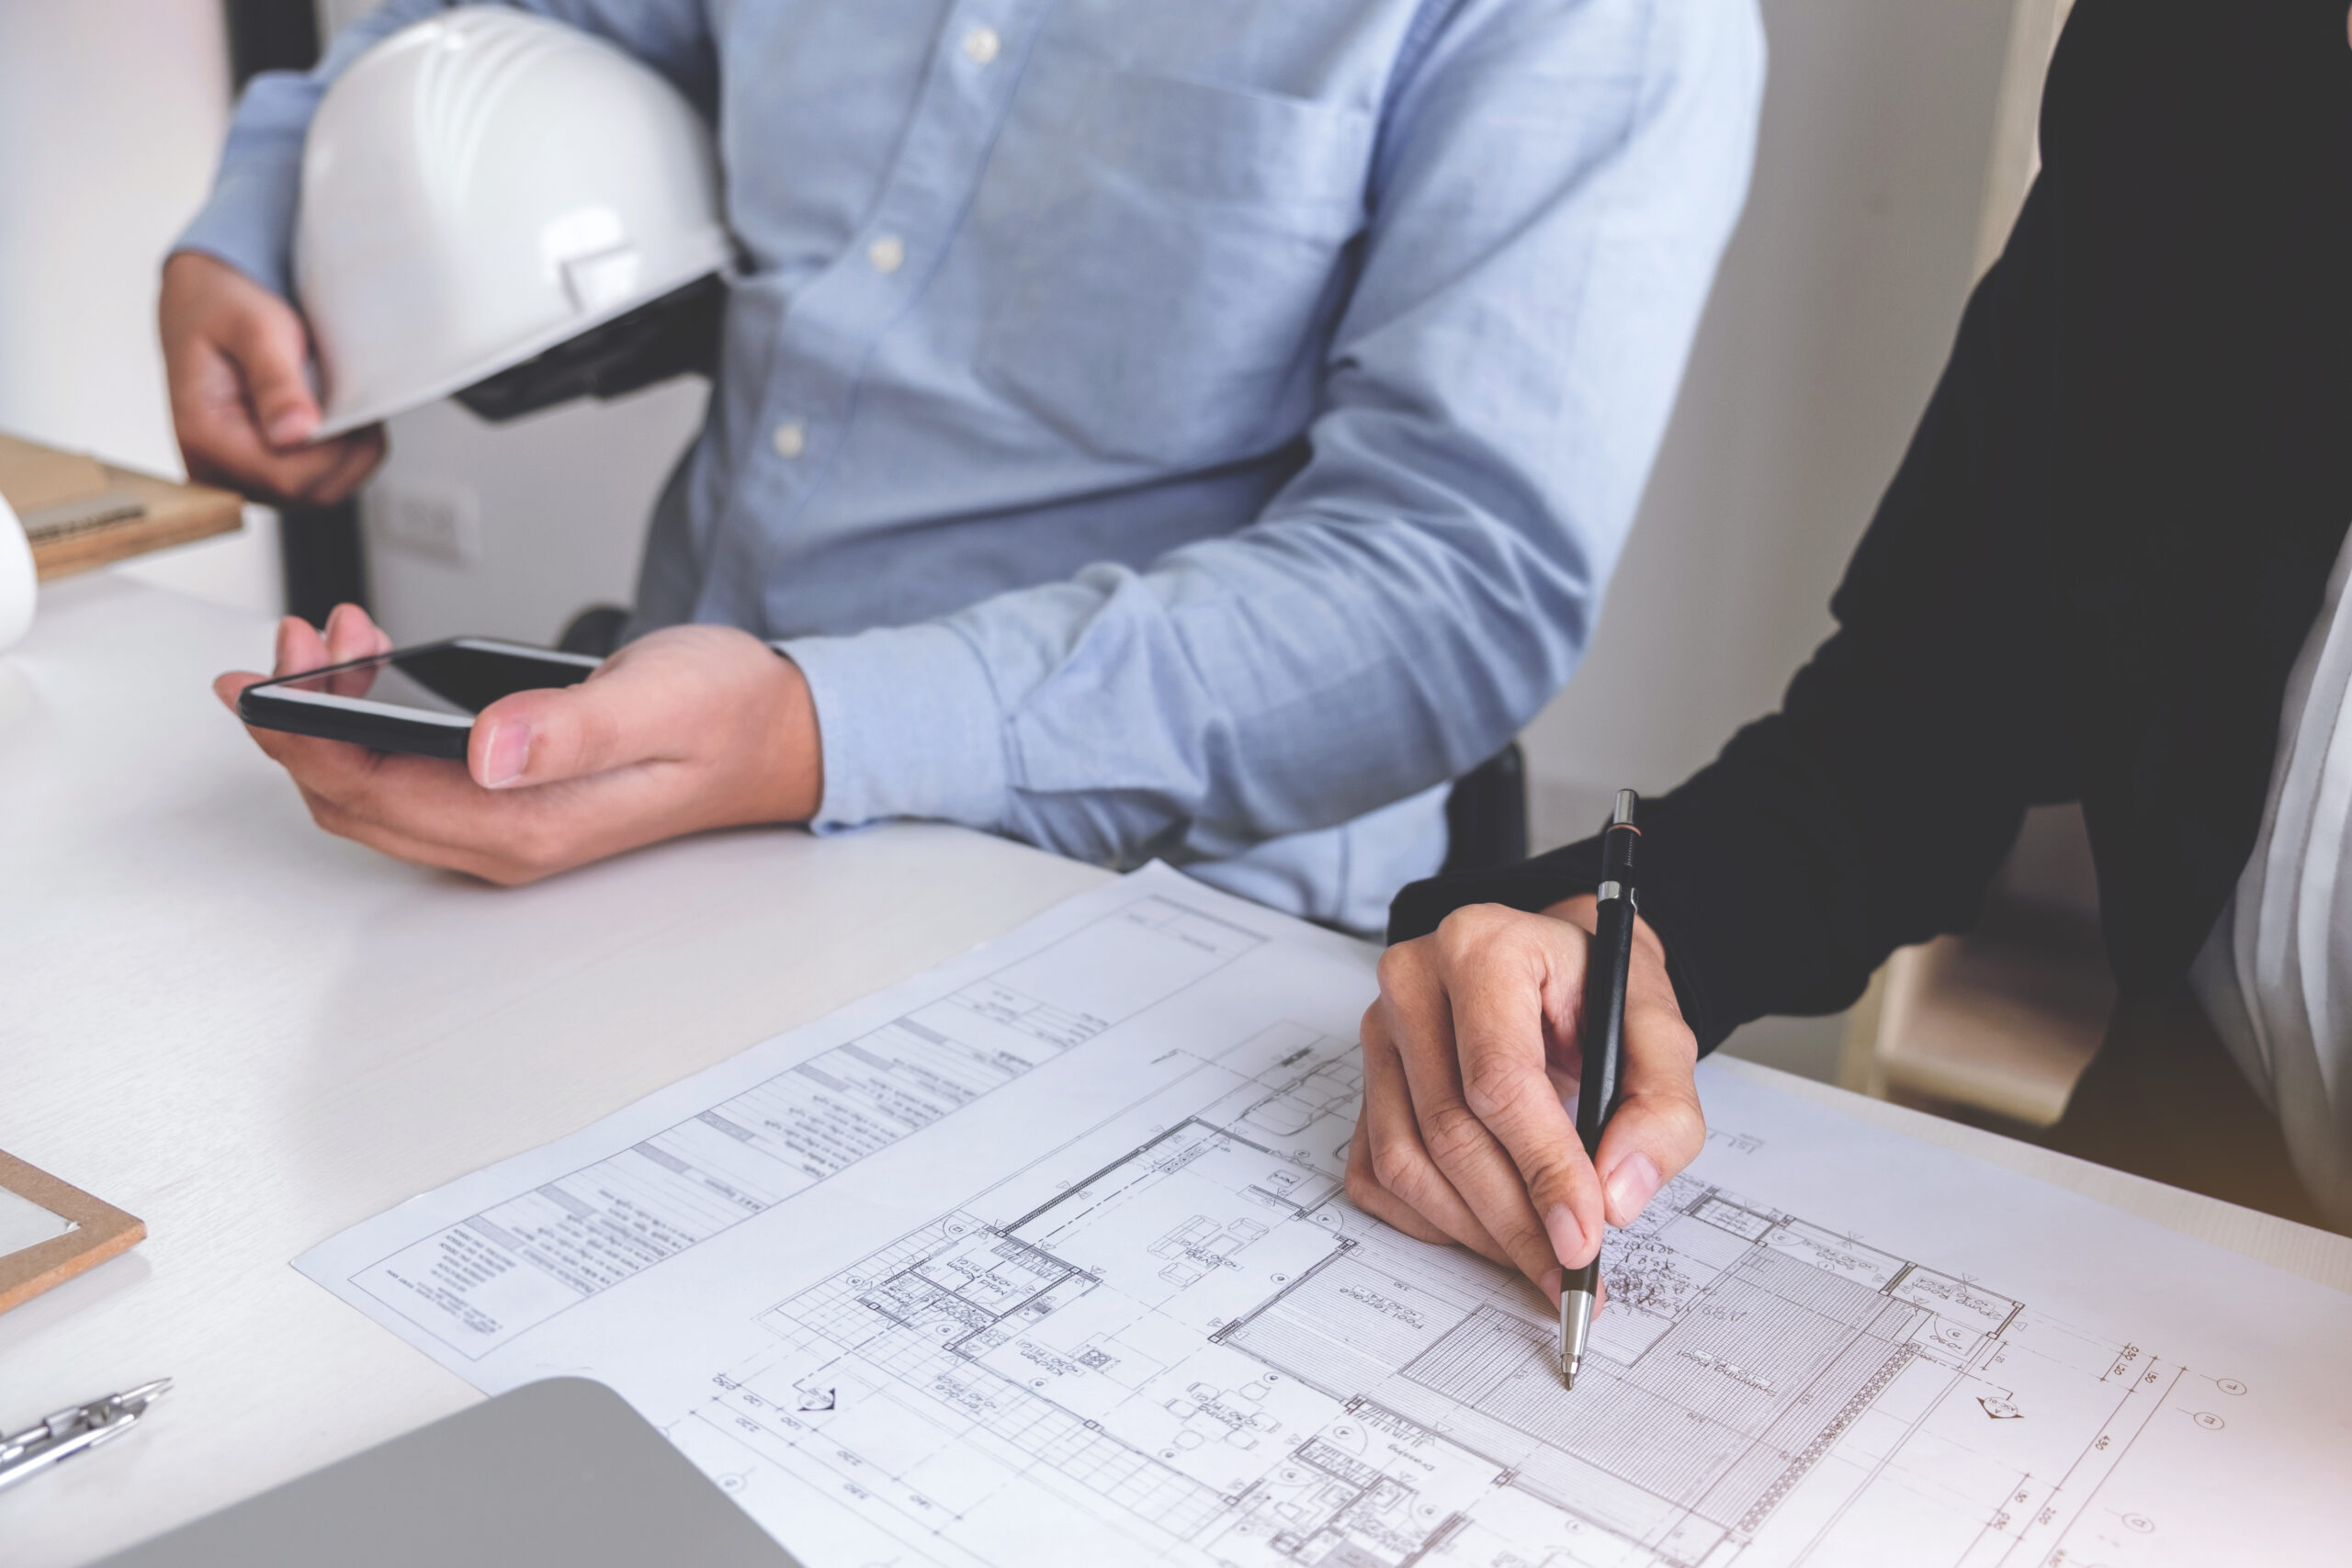 Engineering or Creative architect in construction project, Engineers hands working on construction blueprint and building model at a workplace in office, Building and architecture concept.